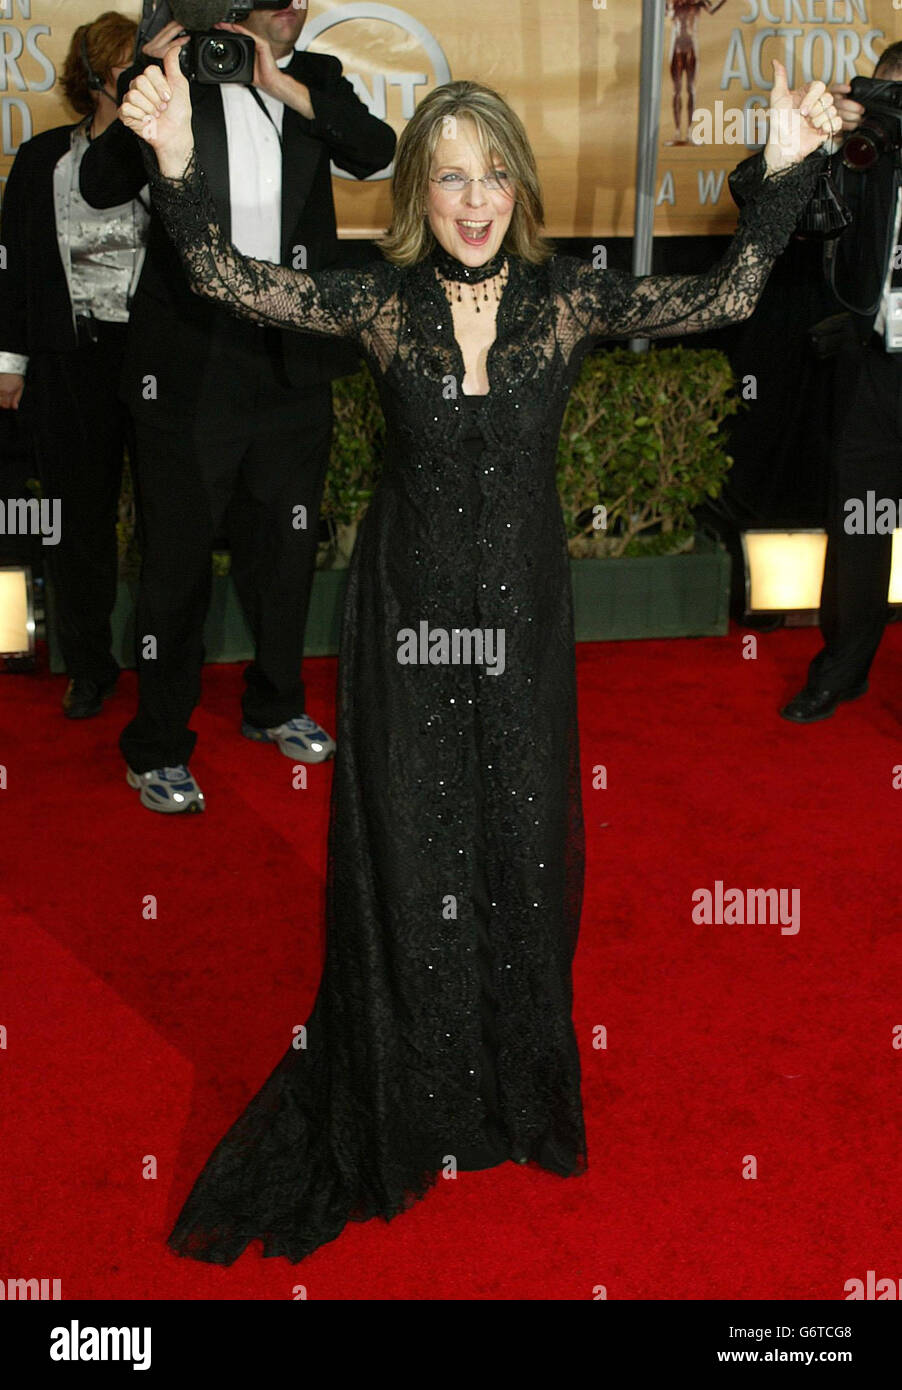 Actress Diane Keaton arrives for the Screen Actors Guild Awards in Los Angeles. Stock Photo